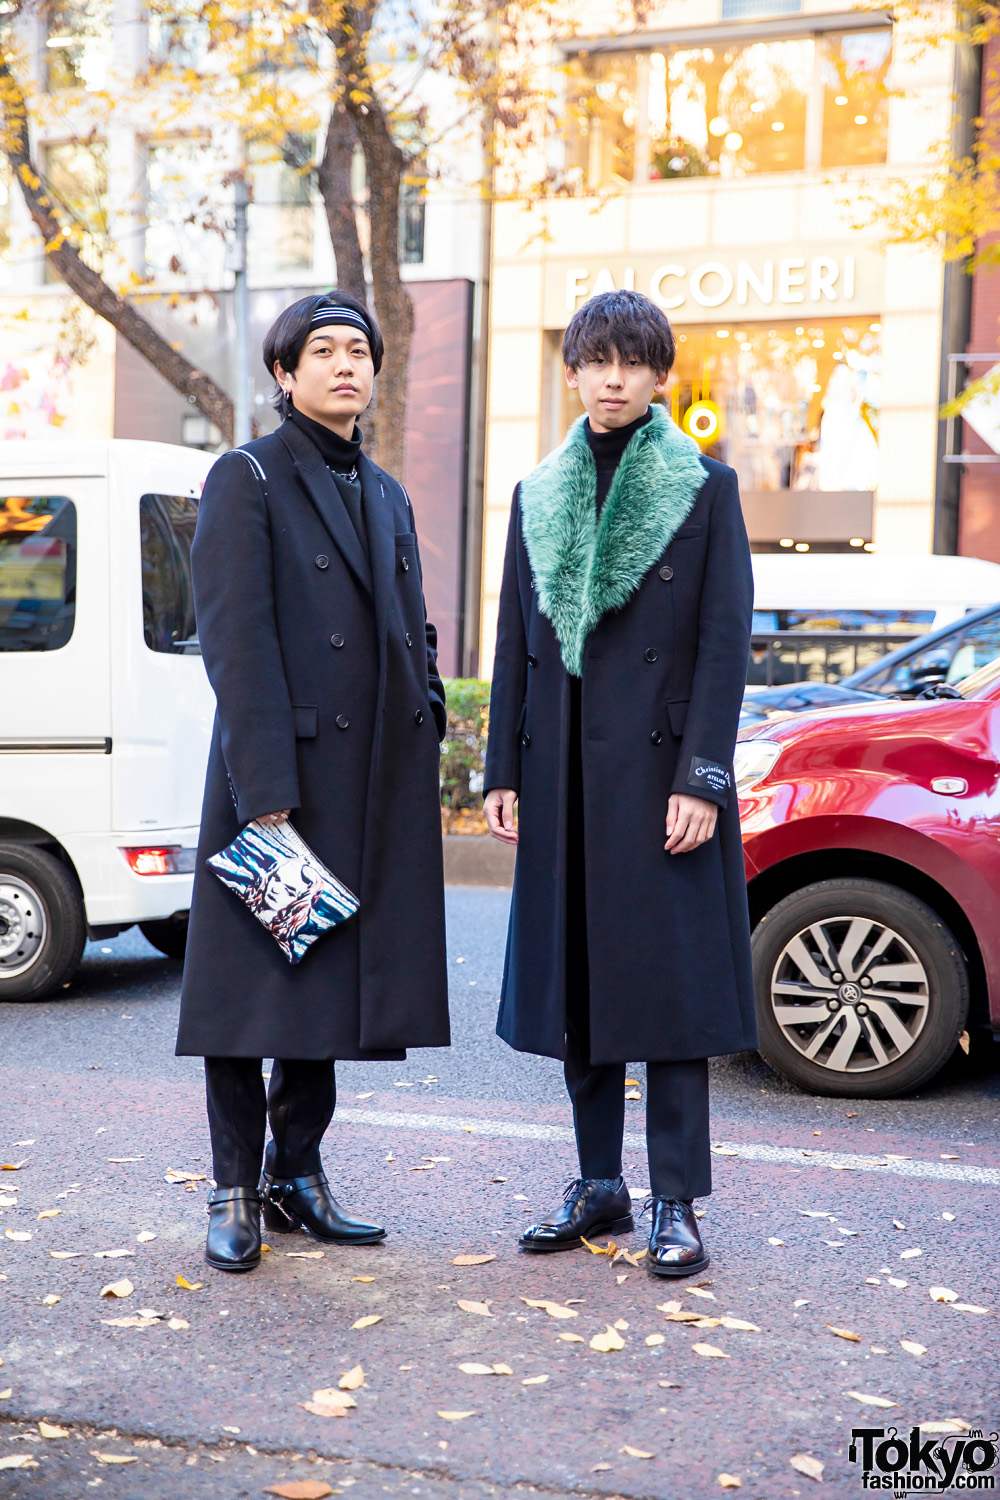 Japanese Menswear w/ All Black Dior, Striped Headband, Turtleneck Sweaters, Hand-Painted Clutch, Anton Berluti and Celine Leather Shoes